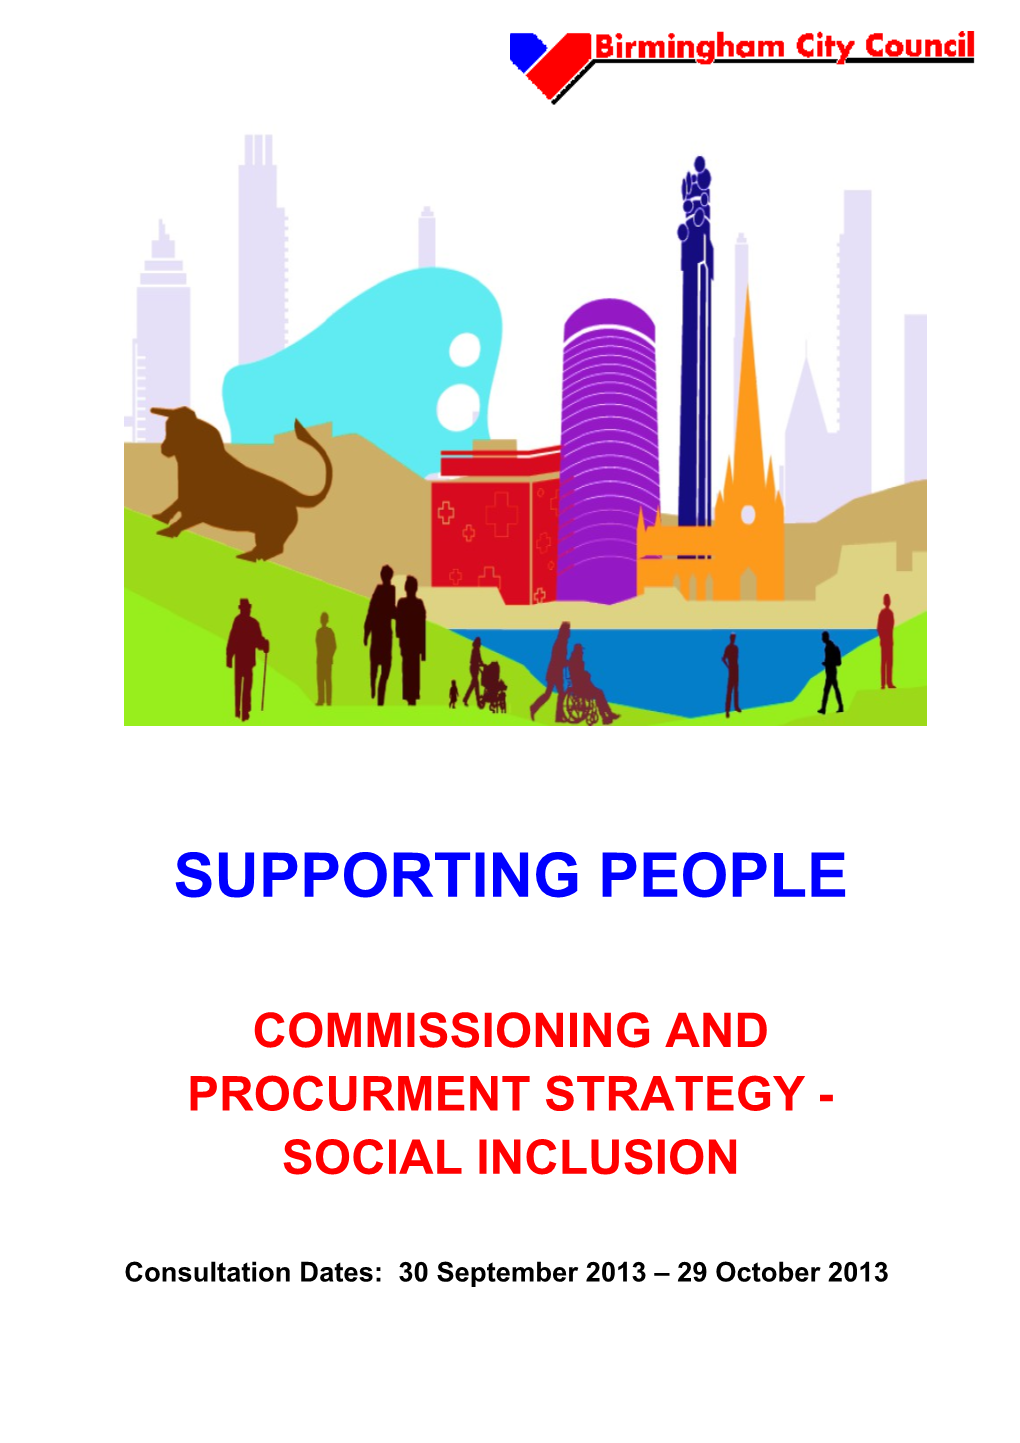 Commissioning and Procurment Strategy - Social Inclusion